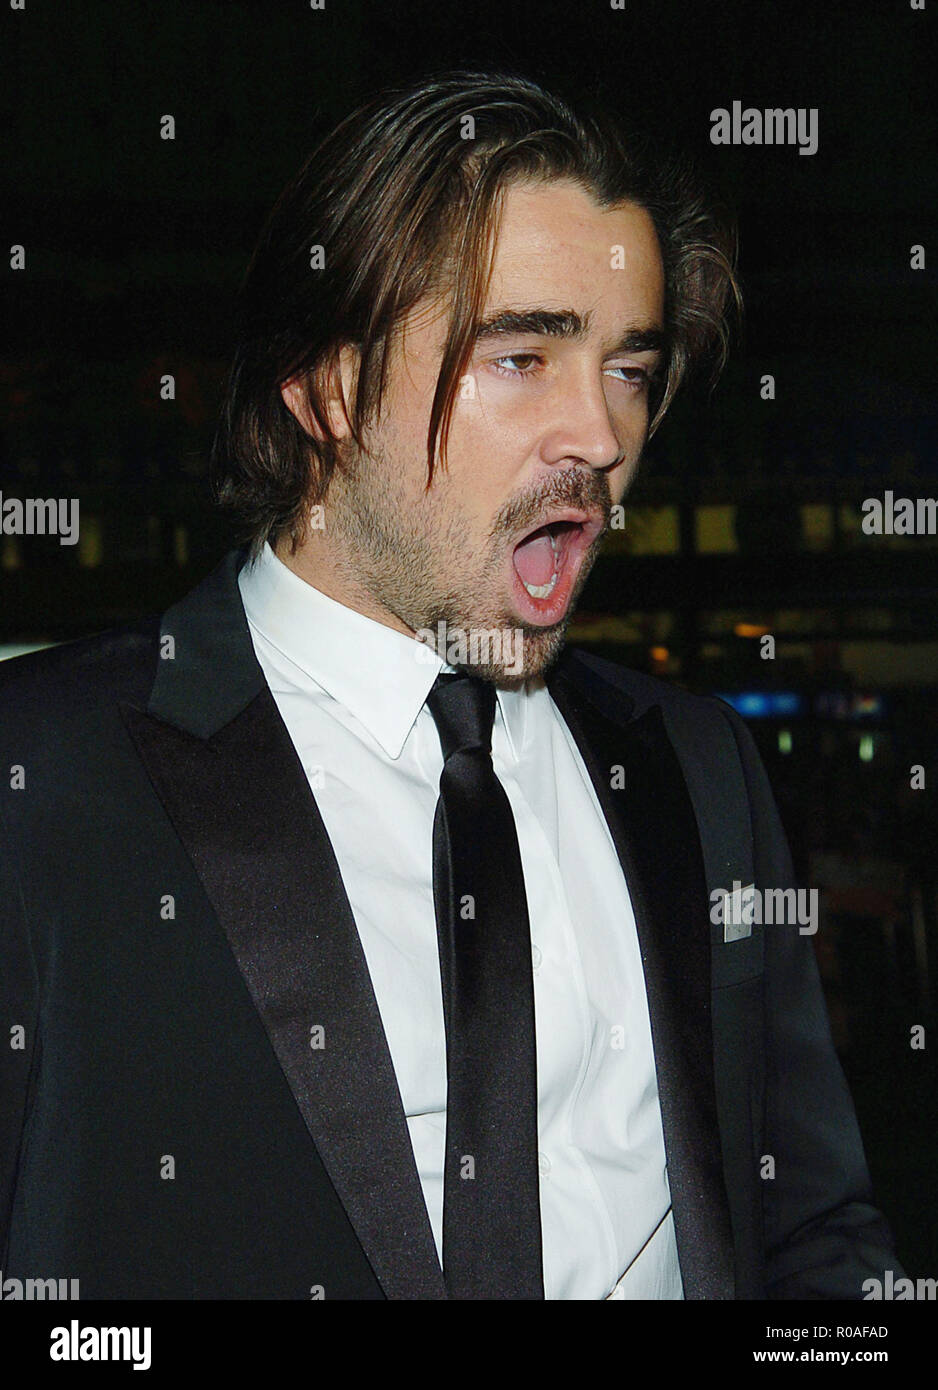 Colin Farrell arriving Alexander Premiere at the Chinese Theatre in Los Angeless. November 16, 2004.FarrellColin009 Red Carpet Event, Vertical, USA, Film Industry, Celebrities,  Photography, Bestof, Arts Culture and Entertainment, Topix Celebrities fashion /  Vertical, Best of, Event in Hollywood Life - California,  Red Carpet and backstage, USA, Film Industry, Celebrities,  movie celebrities, TV celebrities, Music celebrities, Photography, Bestof, Arts Culture and Entertainment,  Topix, headshot, vertical, one person,, from the year , 2004, inquiry tsuni@Gamma-USA.com Stock Photo